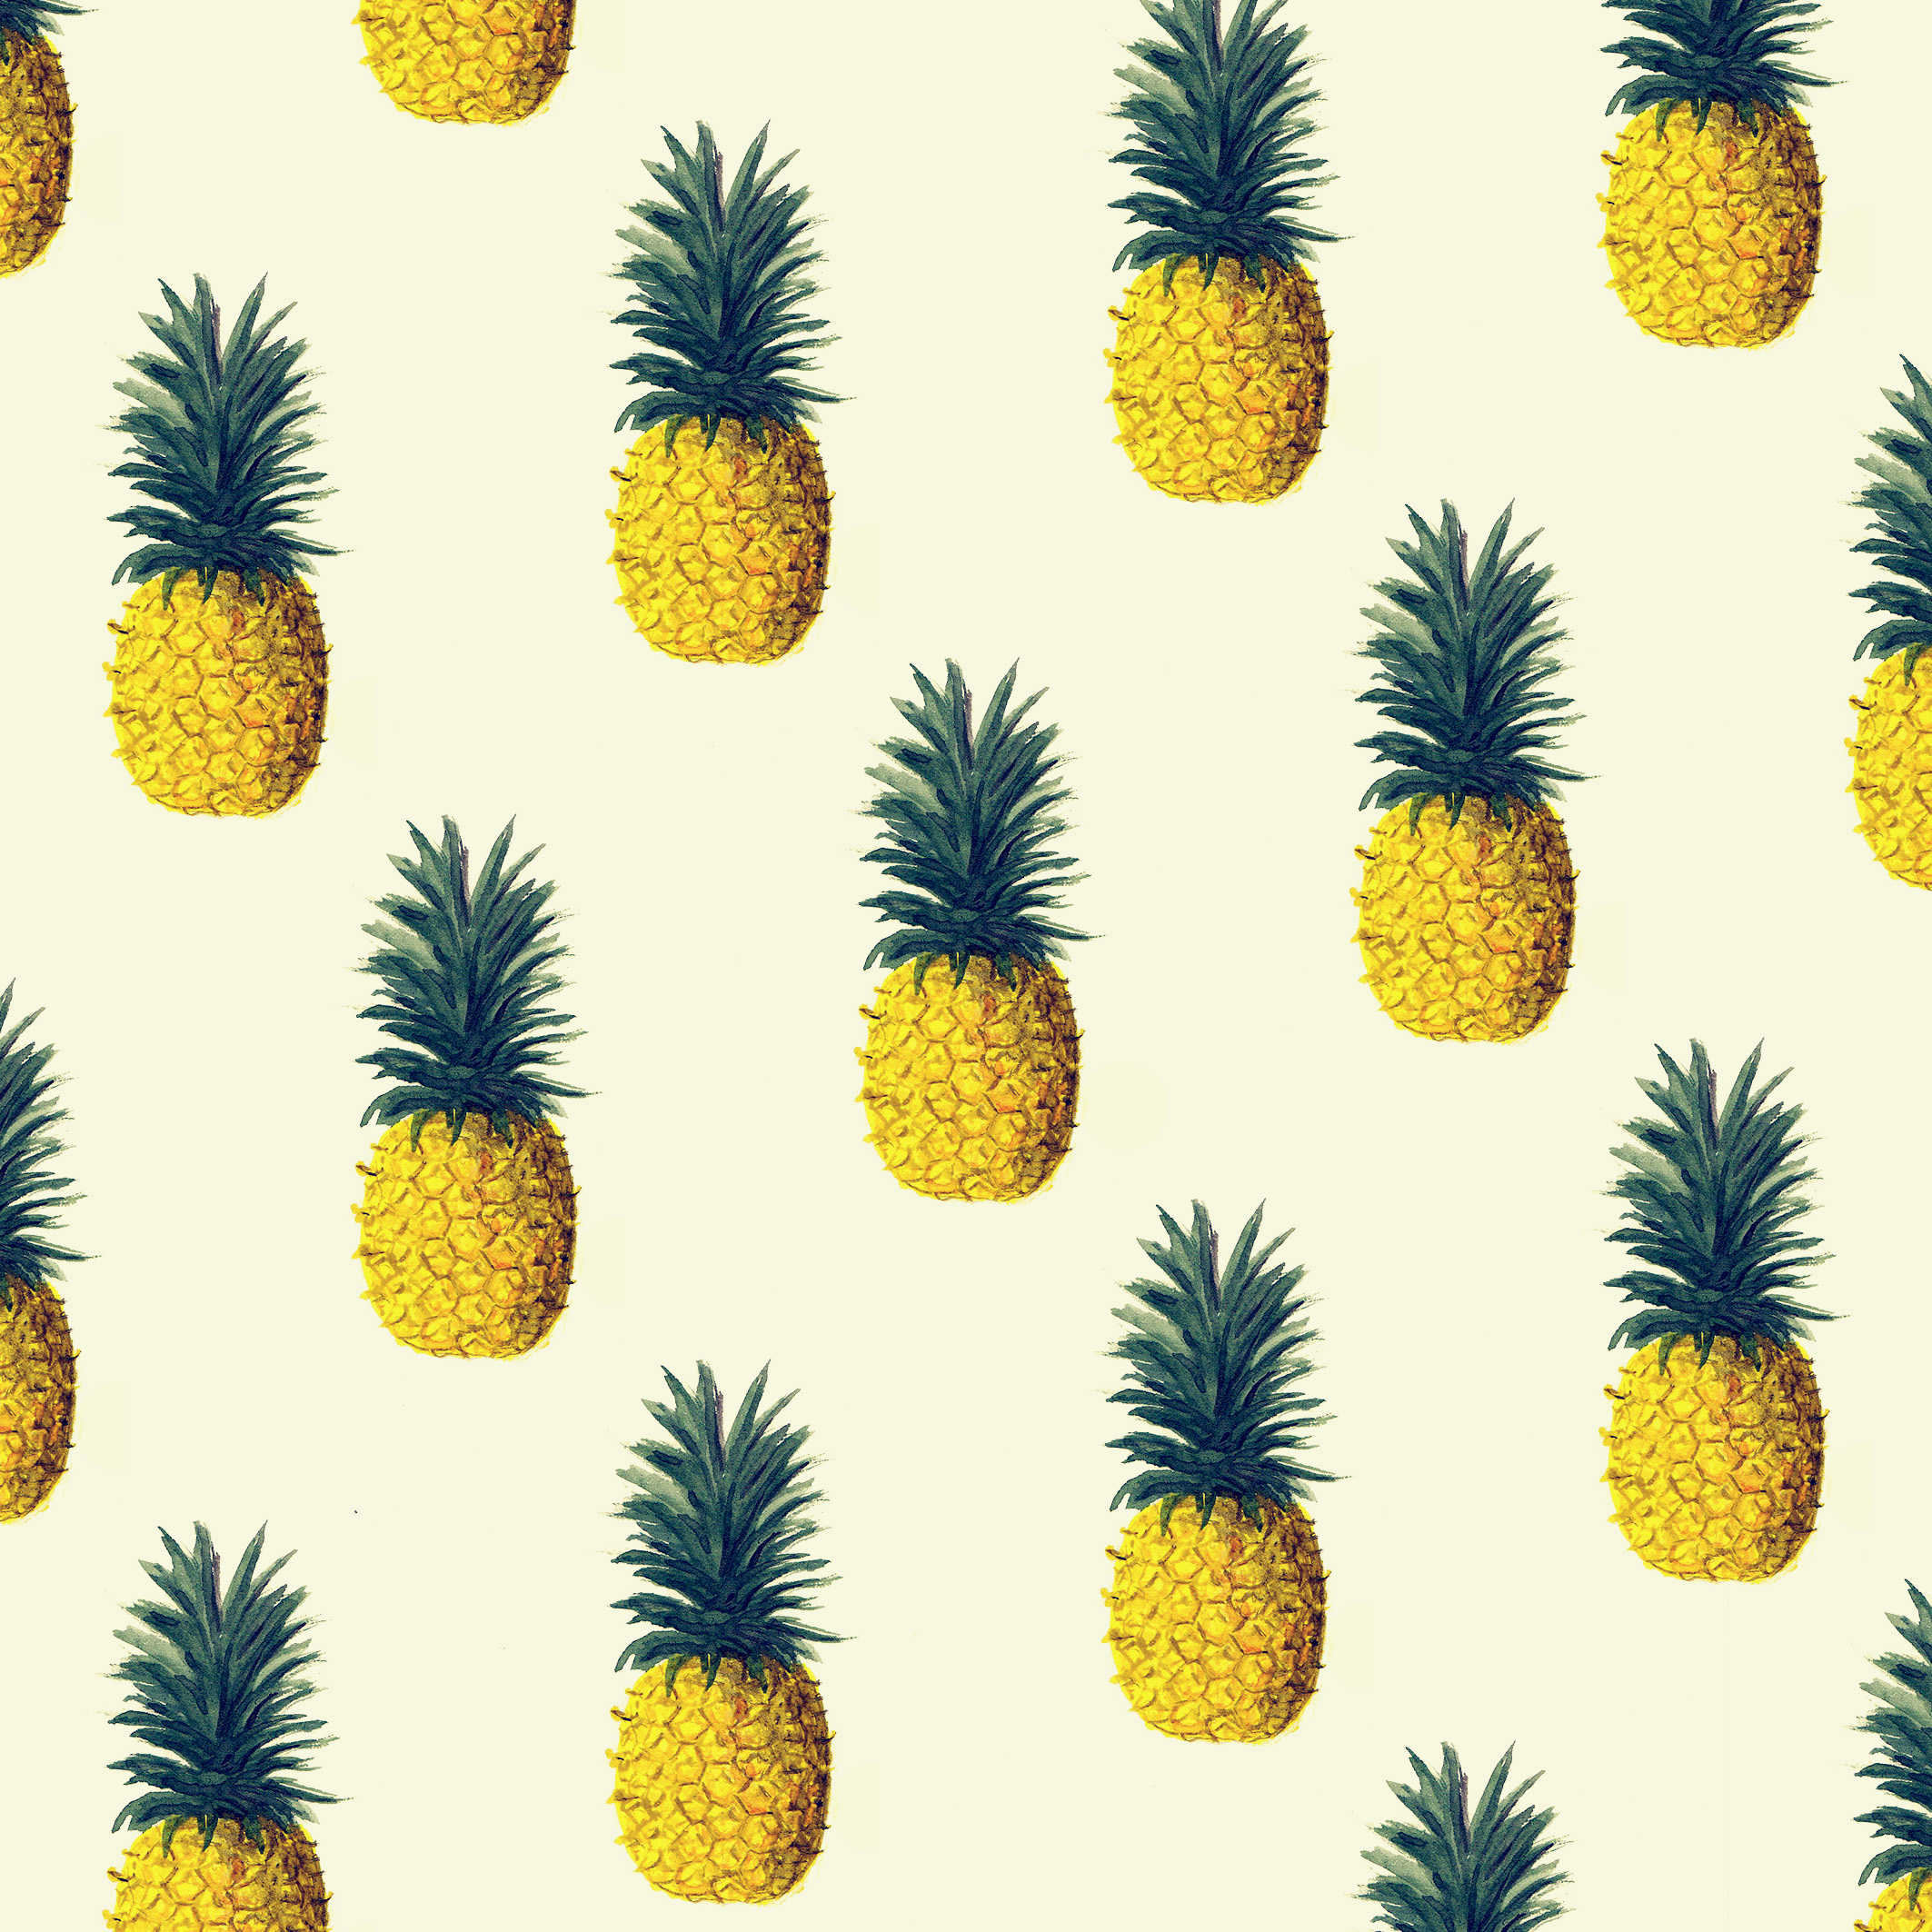 Pineapple HD Images 